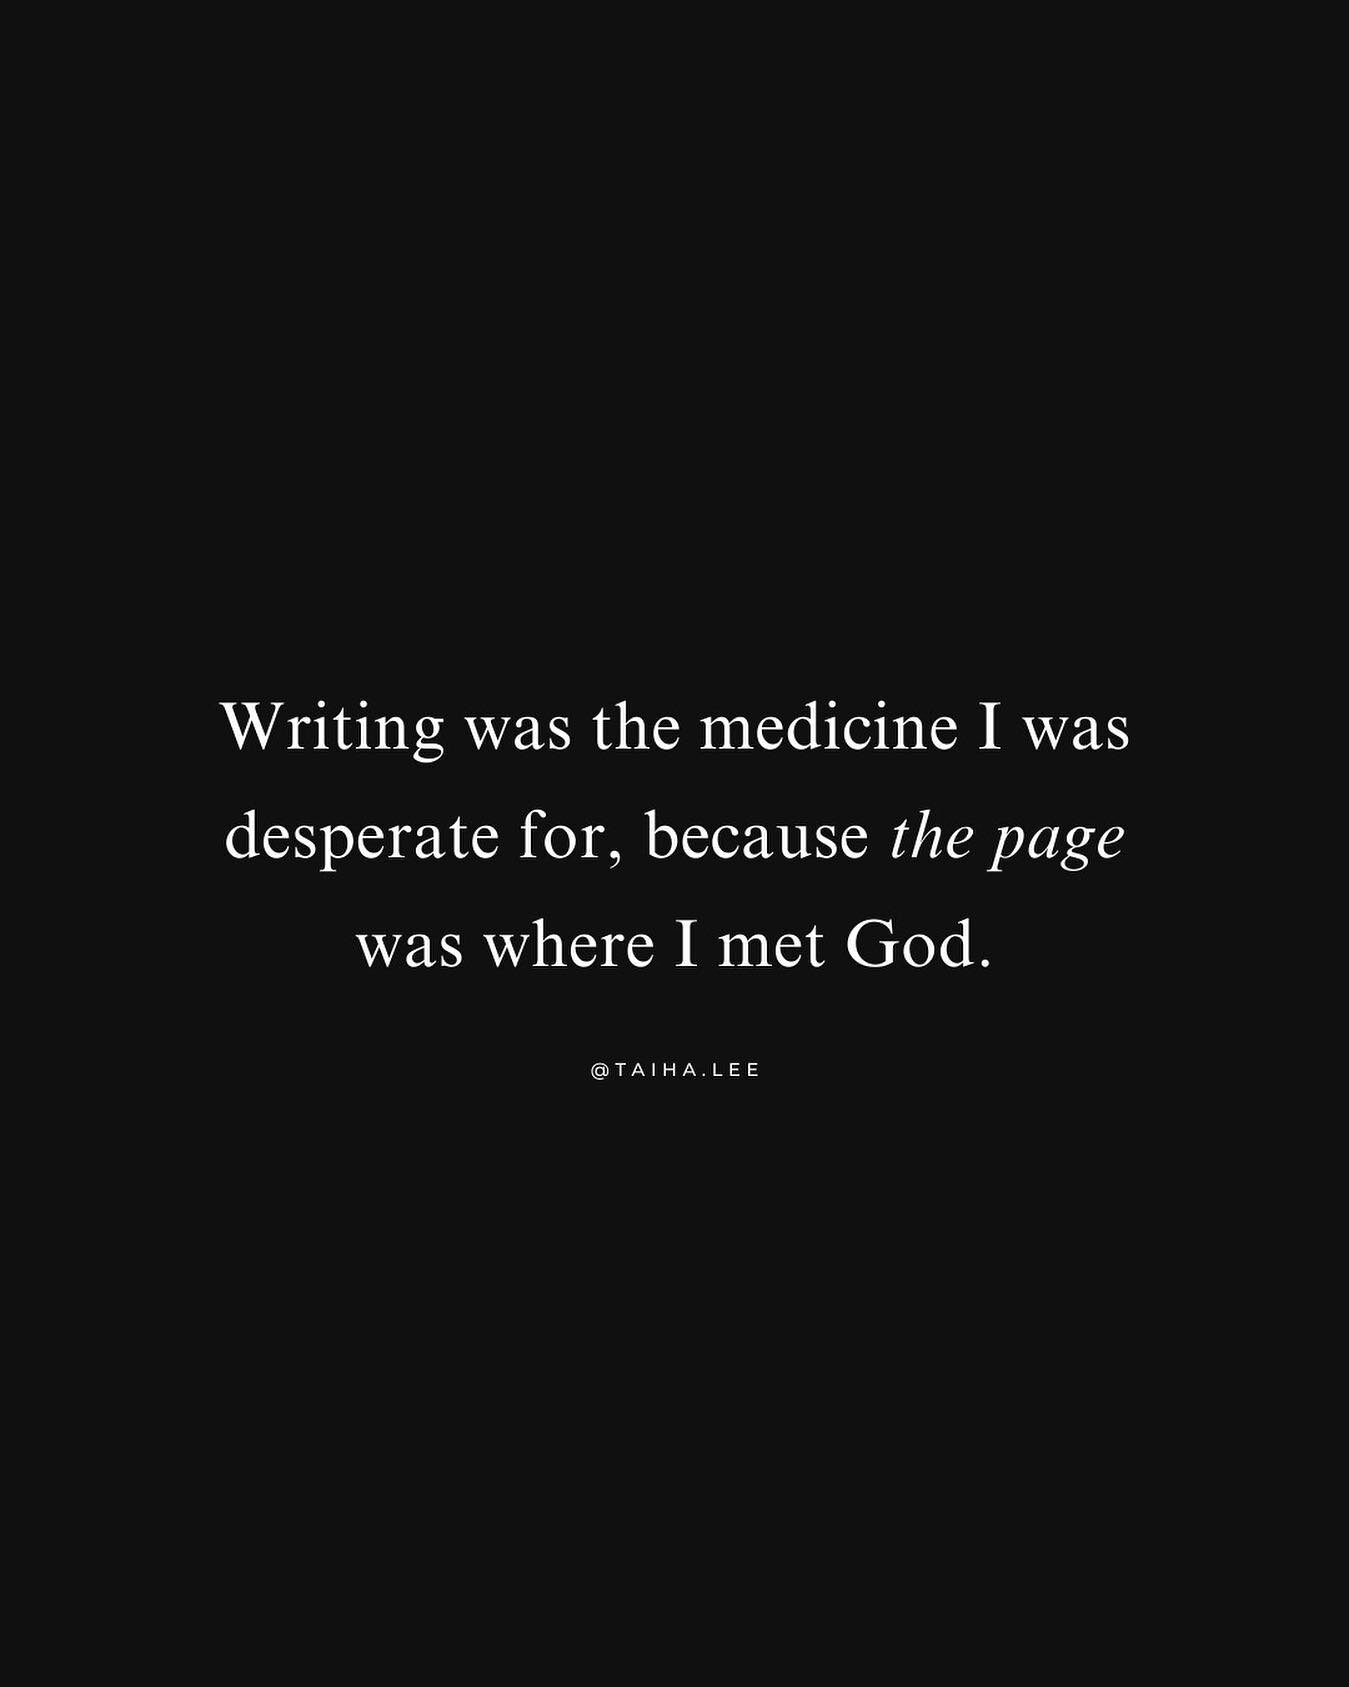 Writing was the medicine I was desperate for, because the page is where I met God.
⠀⠀⠀⠀⠀⠀⠀⠀⠀
Taiha Lee